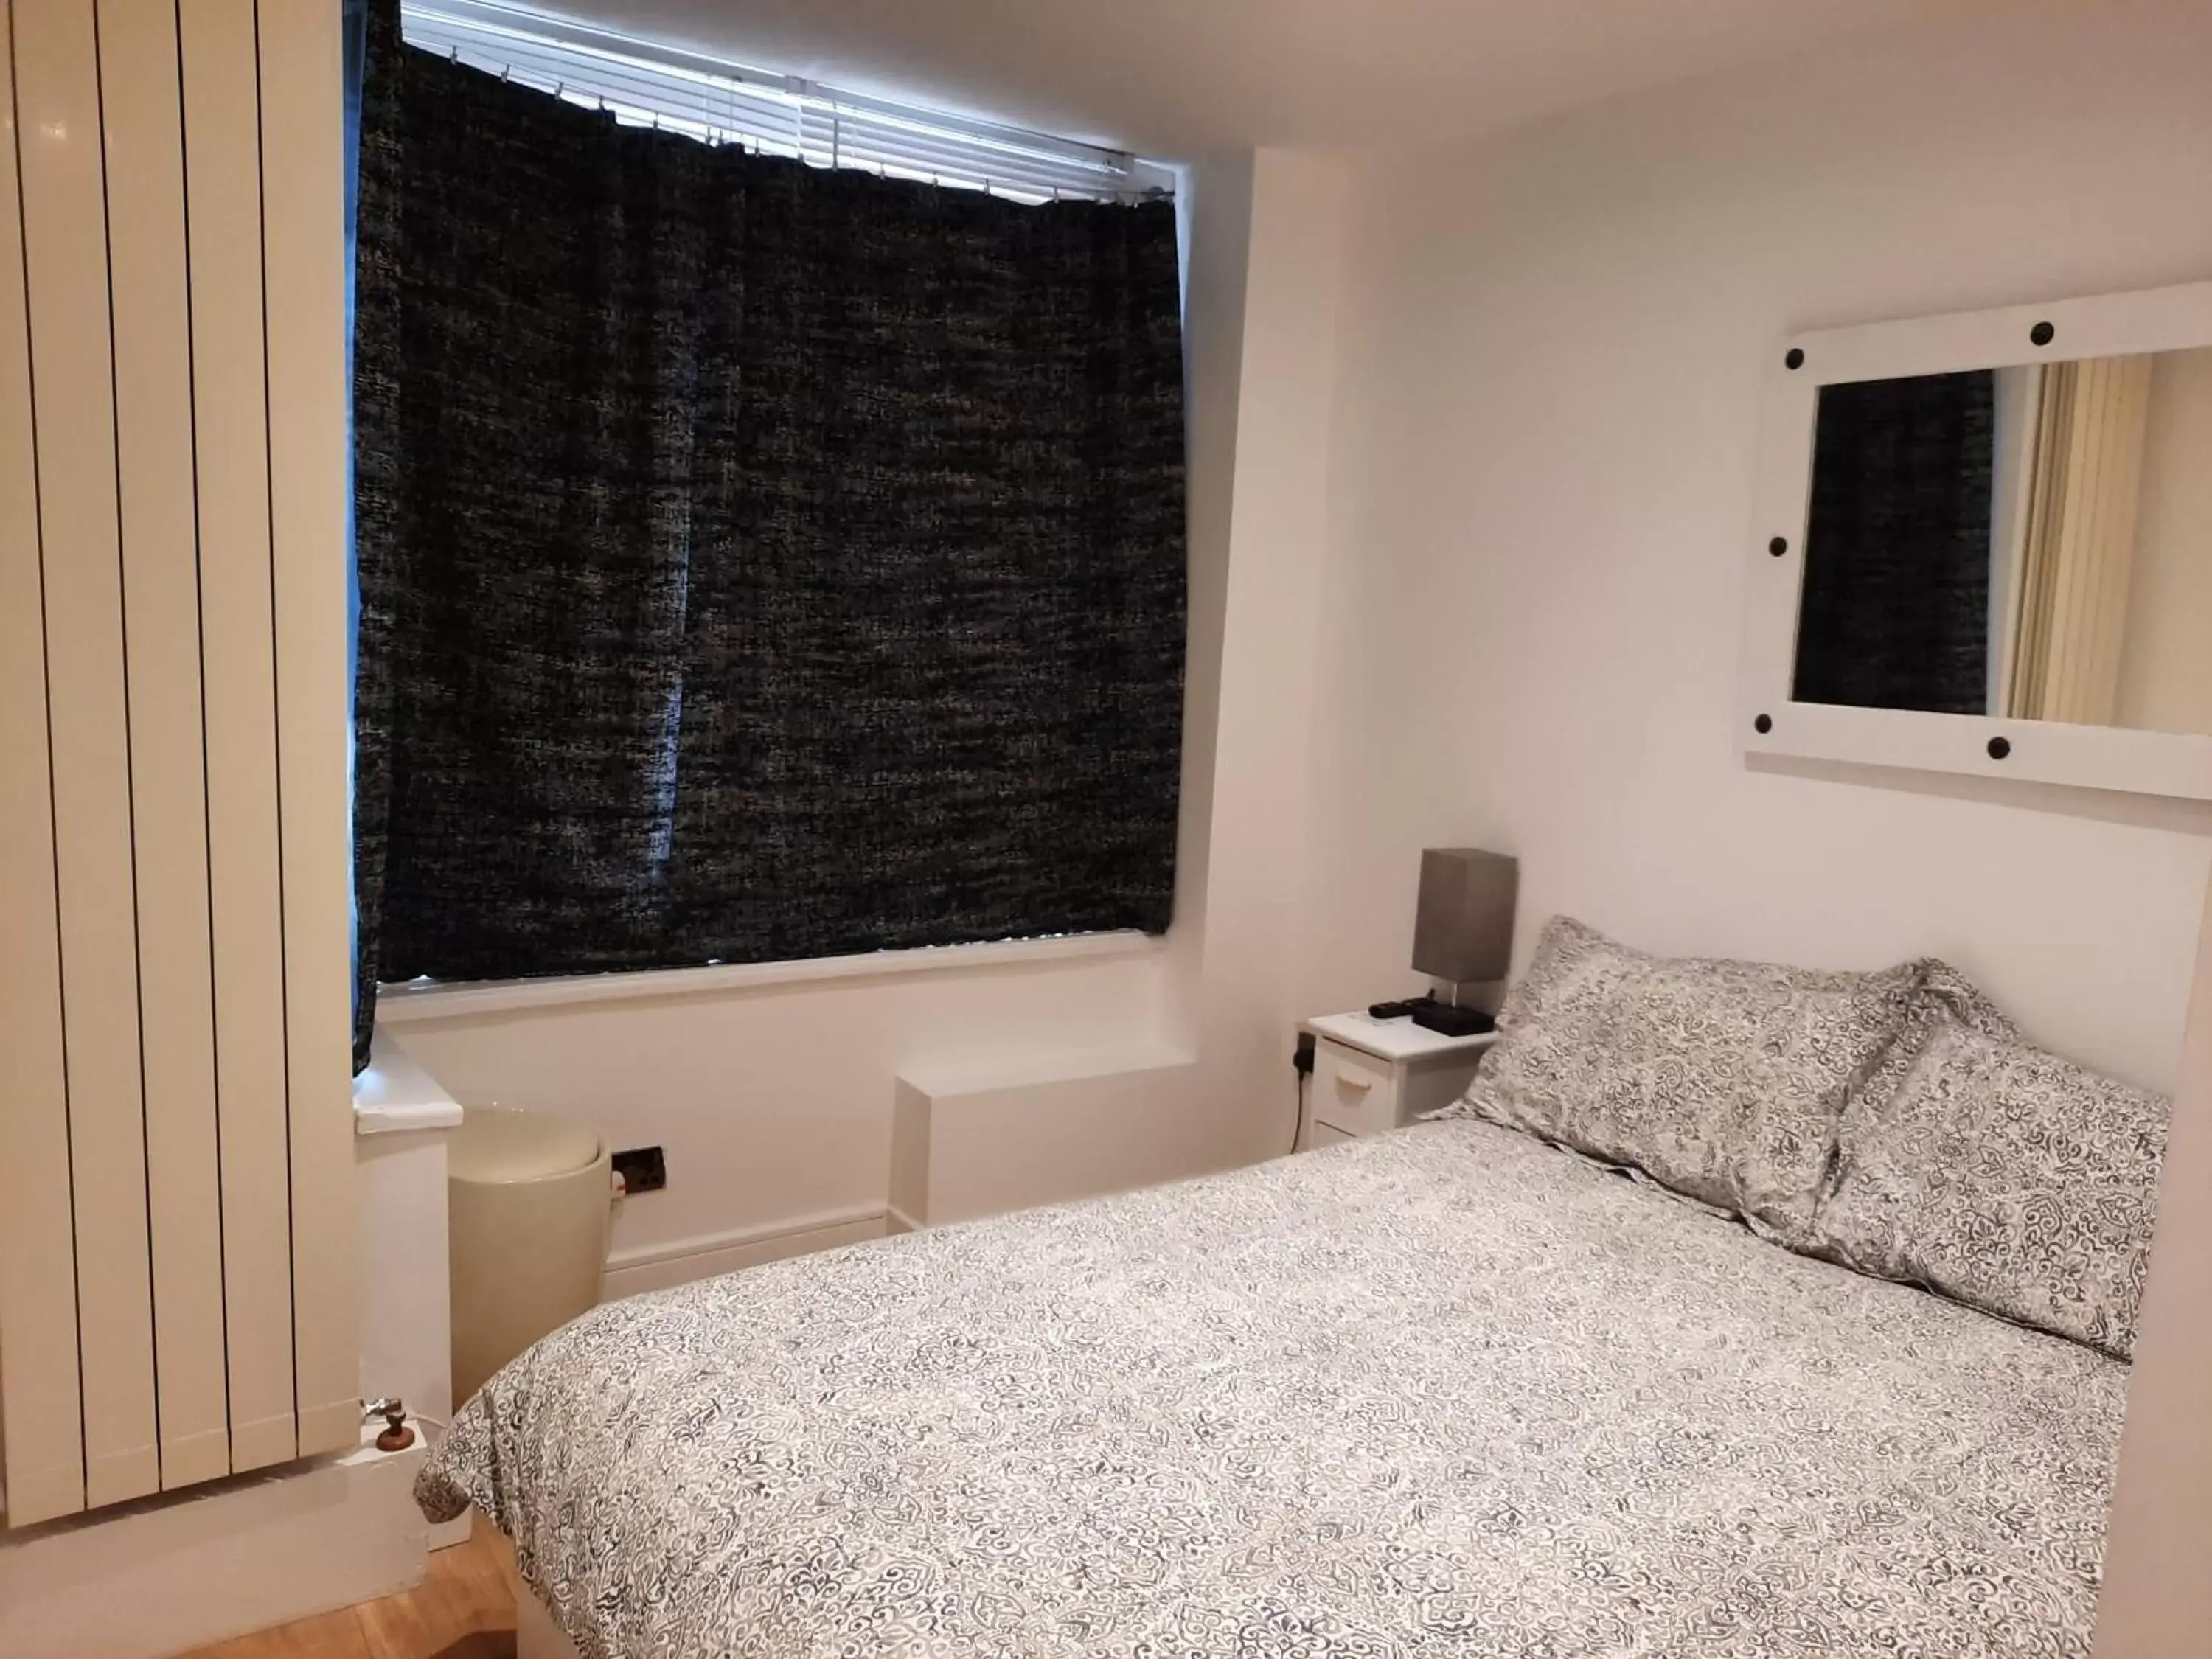 Bed in Lovely Home with full en-suite double bed rooms